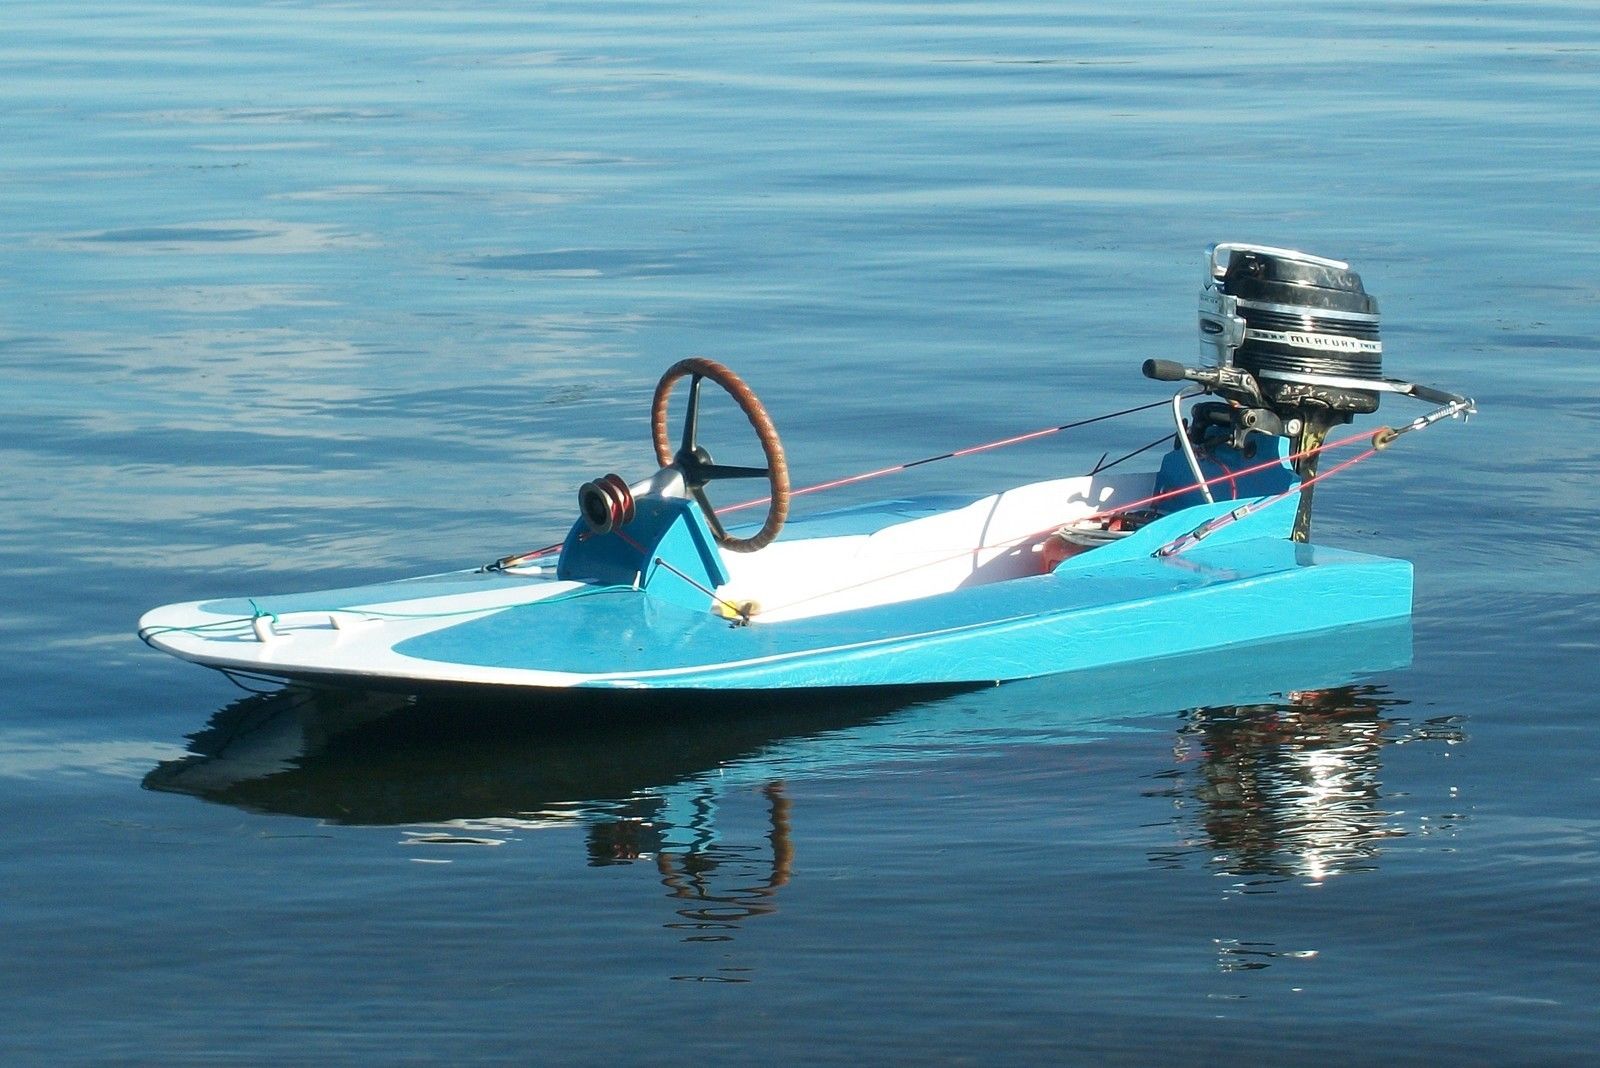 Home Built Mini Max Hydroplane 2010 for sale for $350 ...